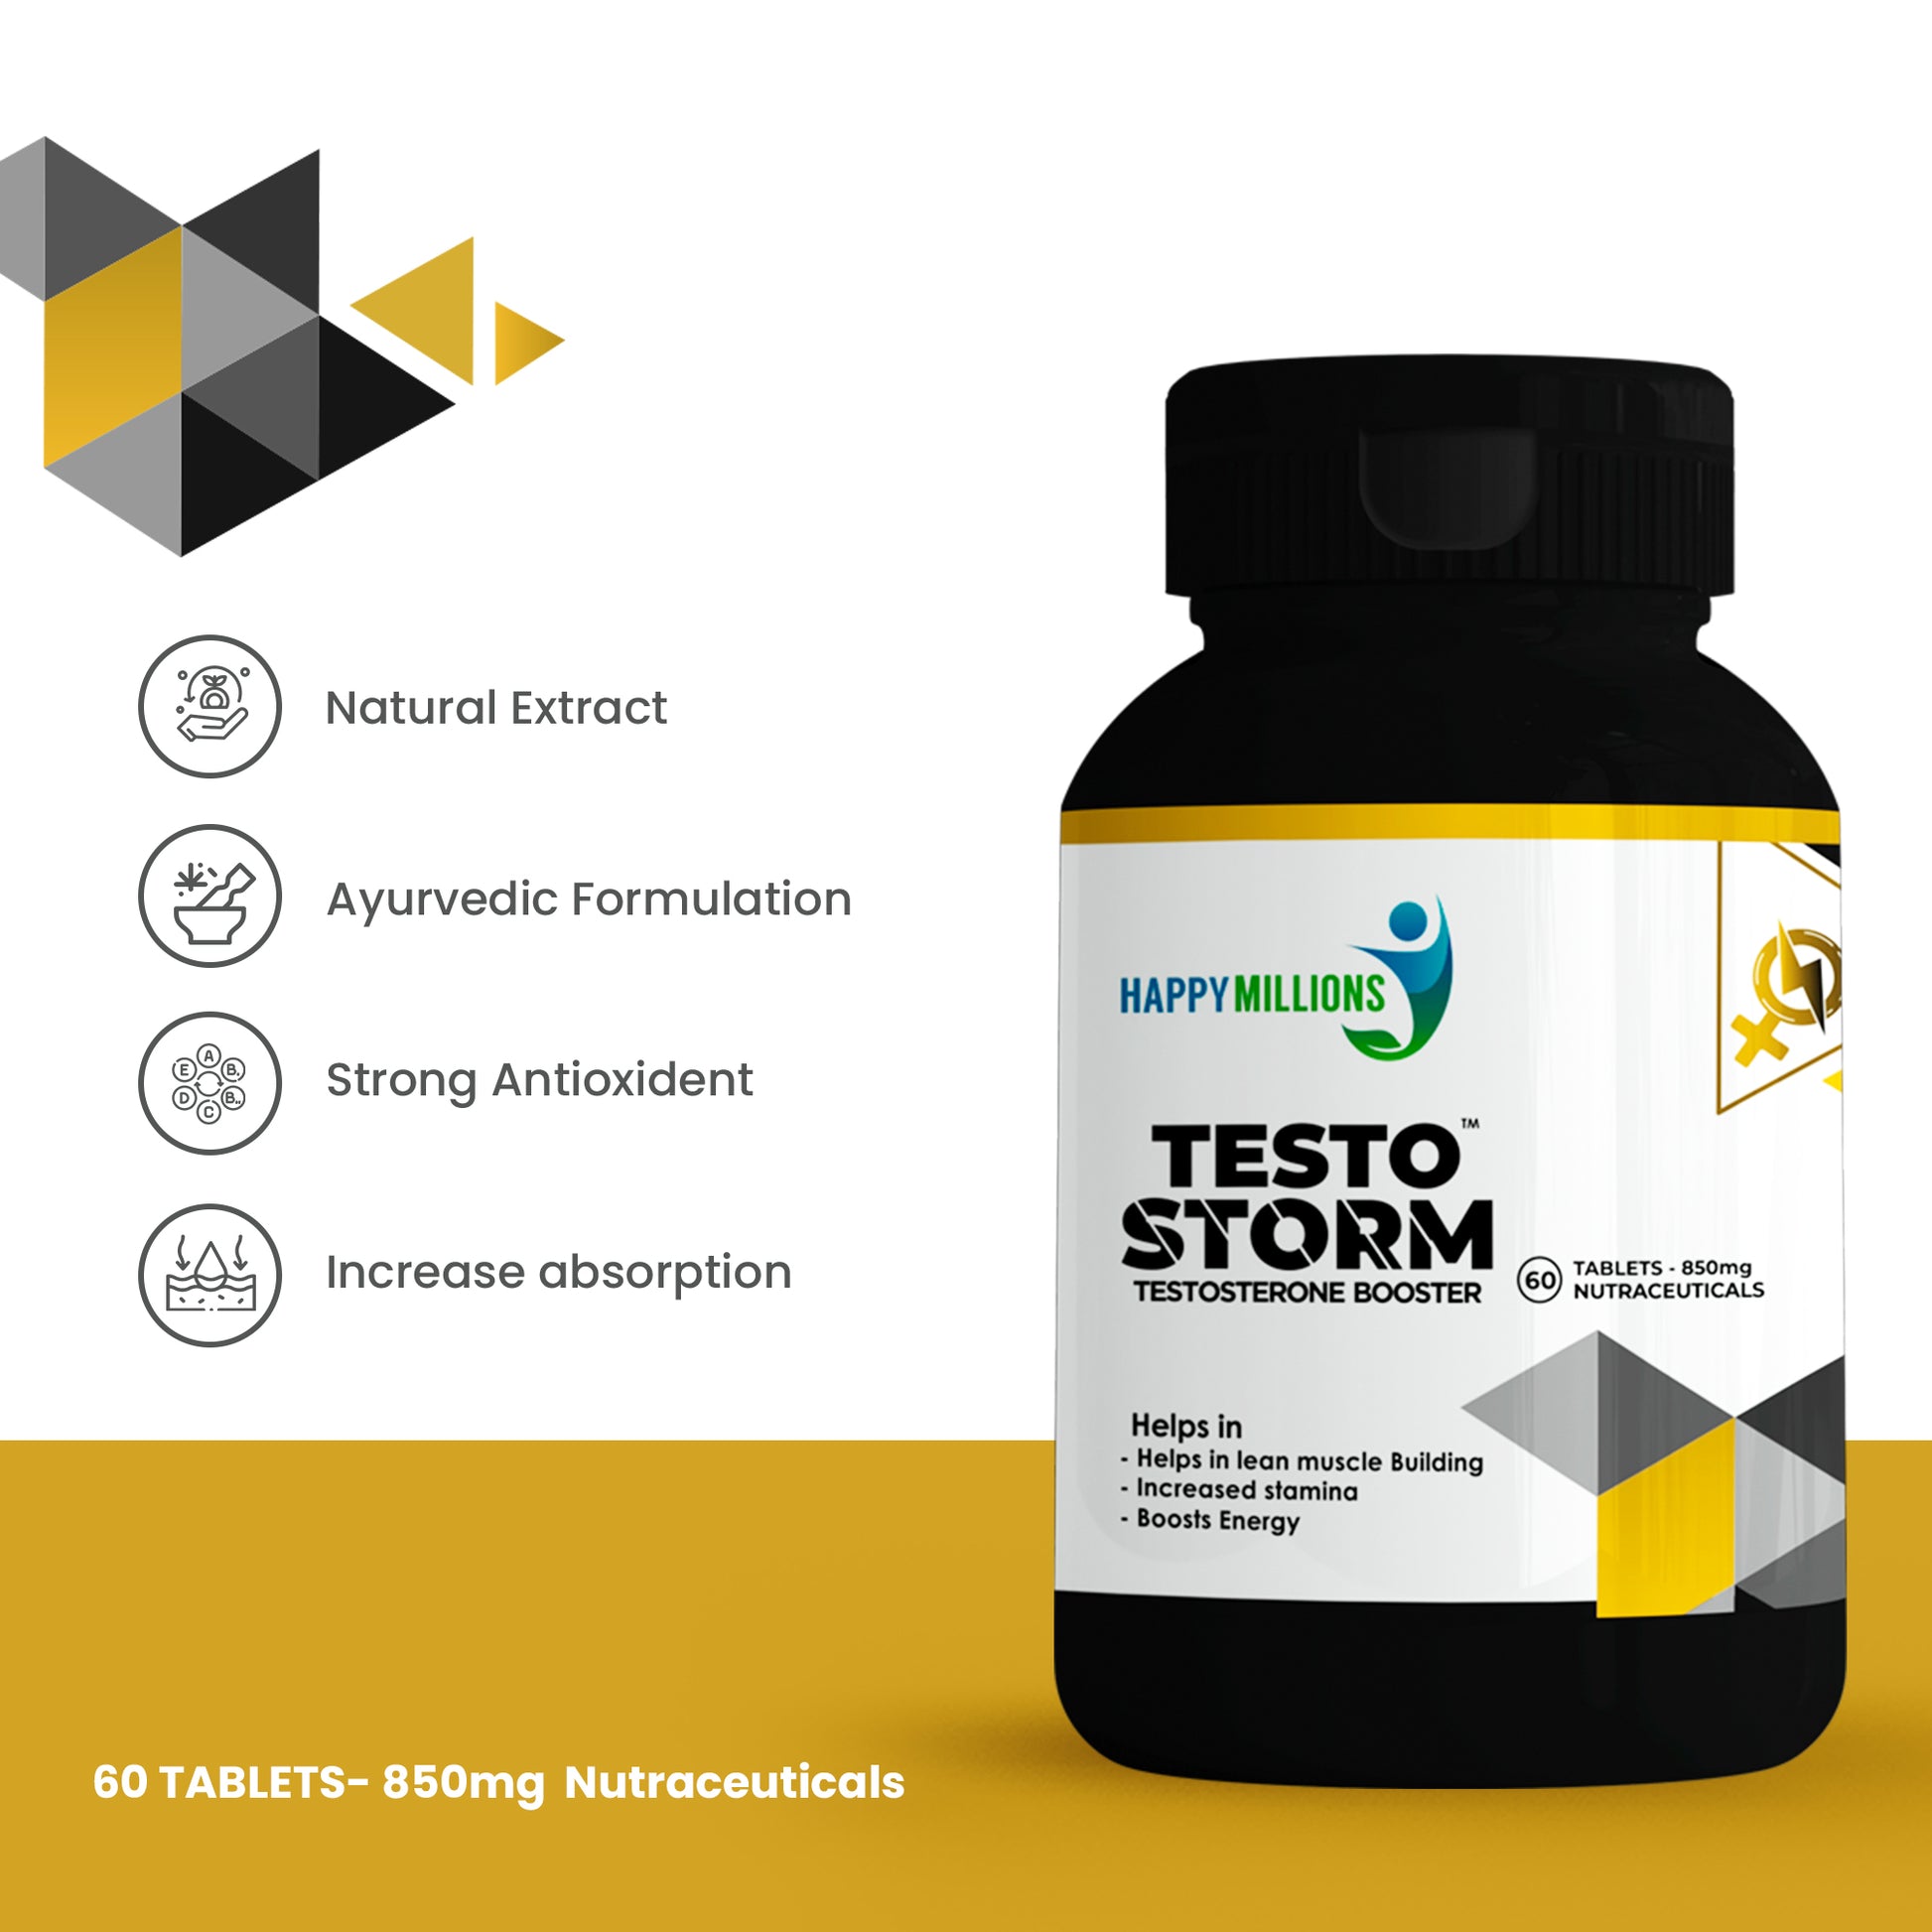 Boost Vitality with Happy Millions Testostorm: Enhance Testosterone Levels and Overall Wellness.